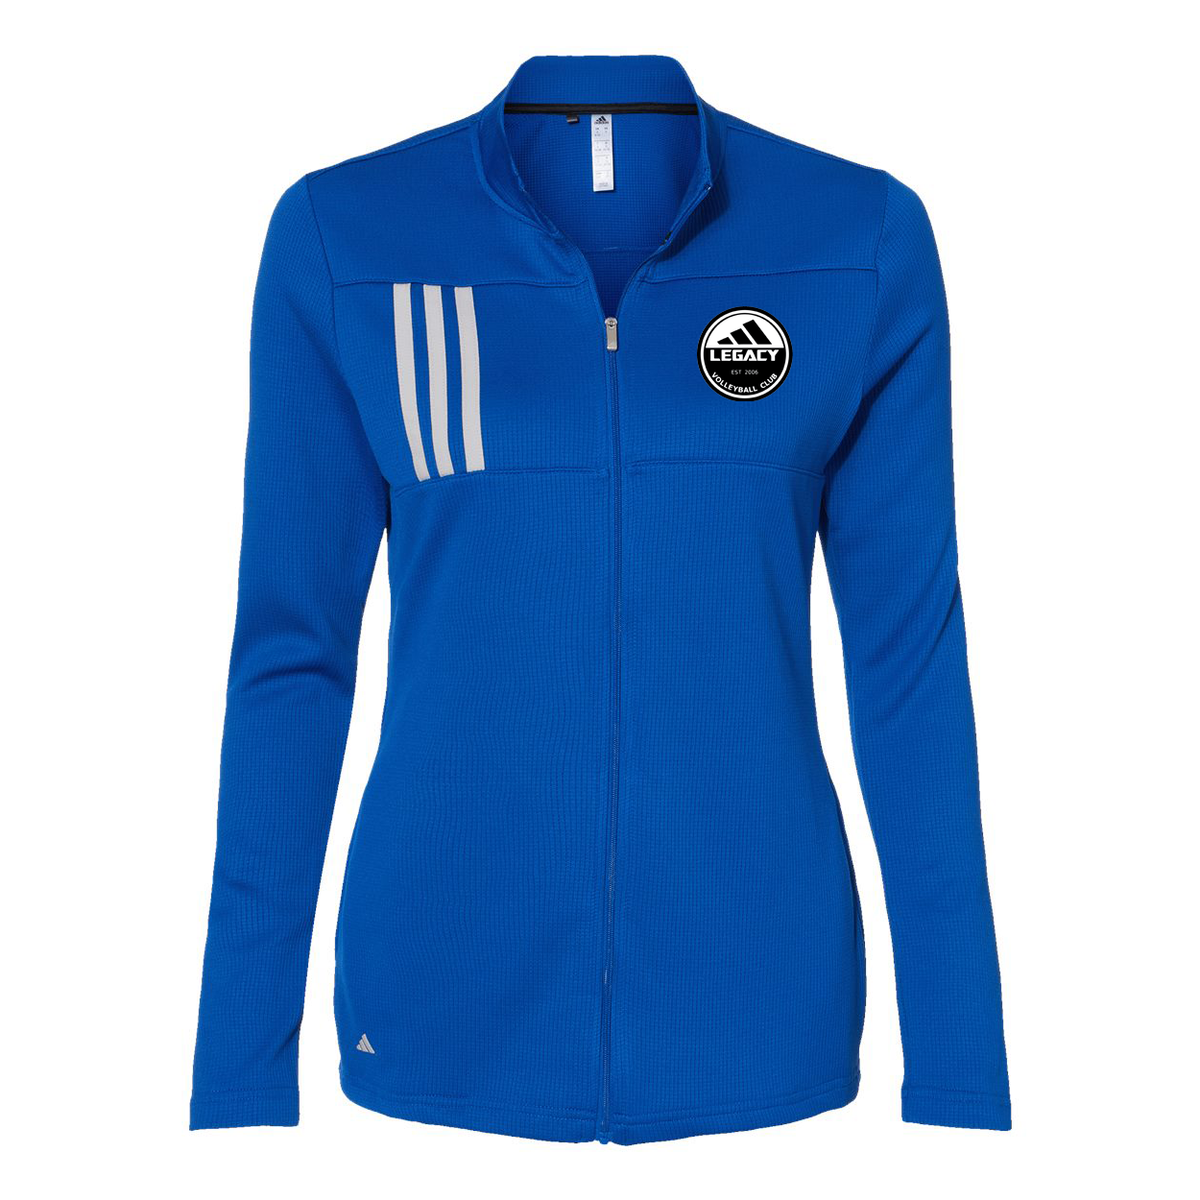 Legacy Volleyball Club Women's 3-Stripes Double Knit Full-Zip